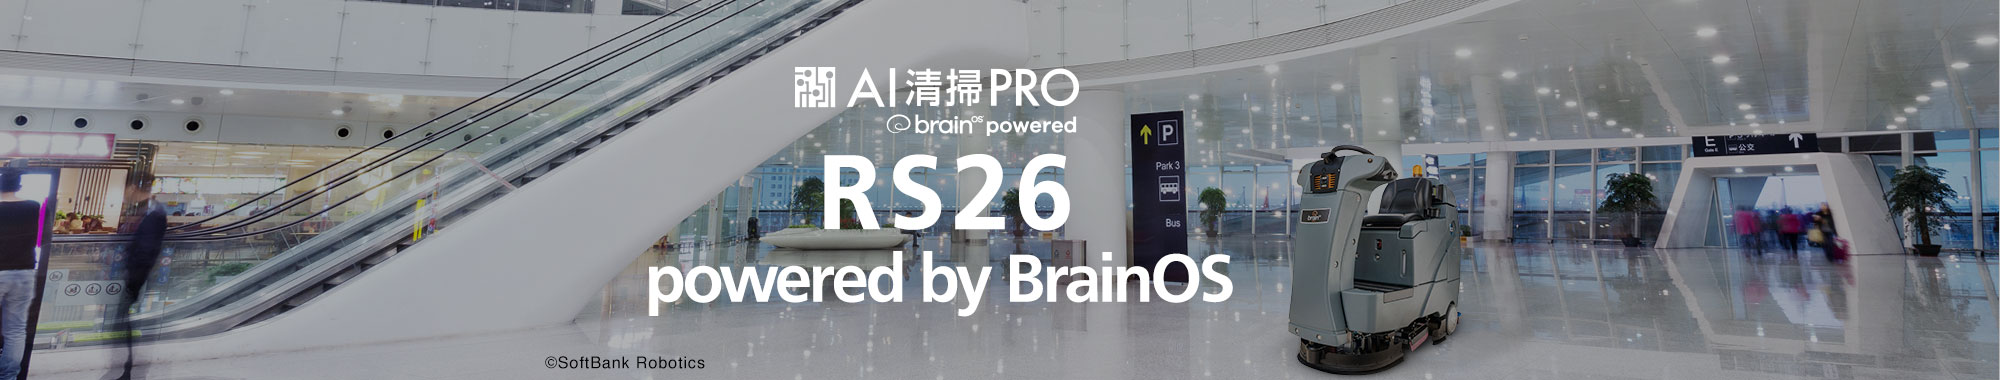 RS26 powered by BrainOS